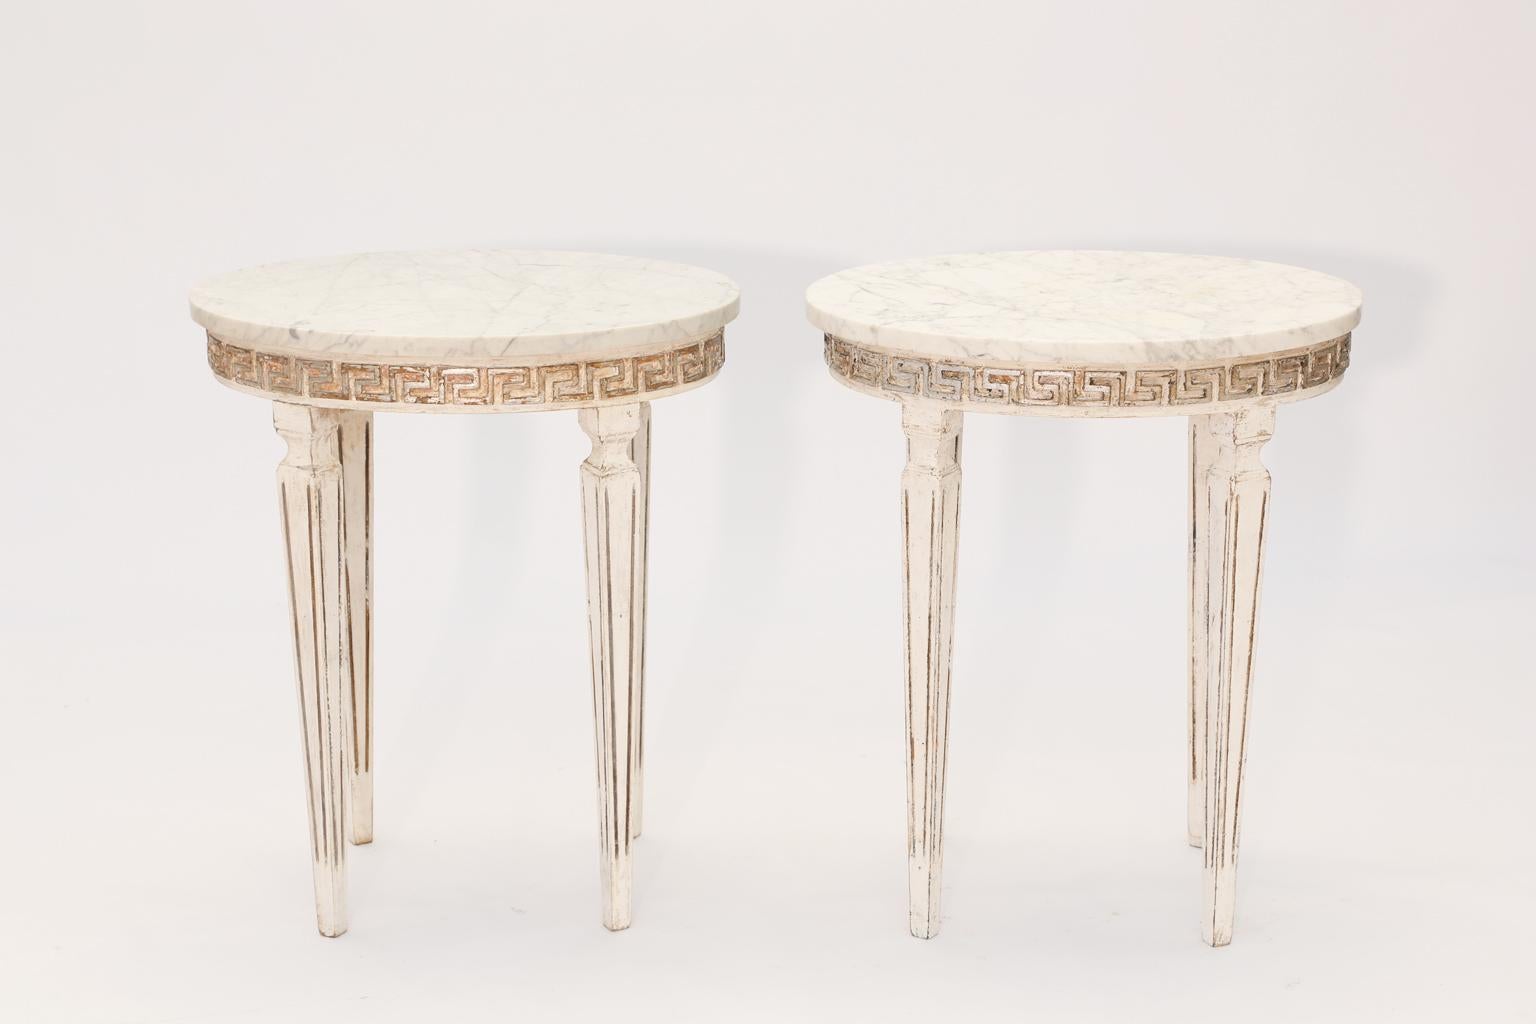 Pair of side tables, each having an oval top of Carrara marble, on painted and parcel silver gilt wooden base, its apron carved with Greek-key scroll, raised on four, square-section, fluted, tapering legs. 

Stock ID: D1603.